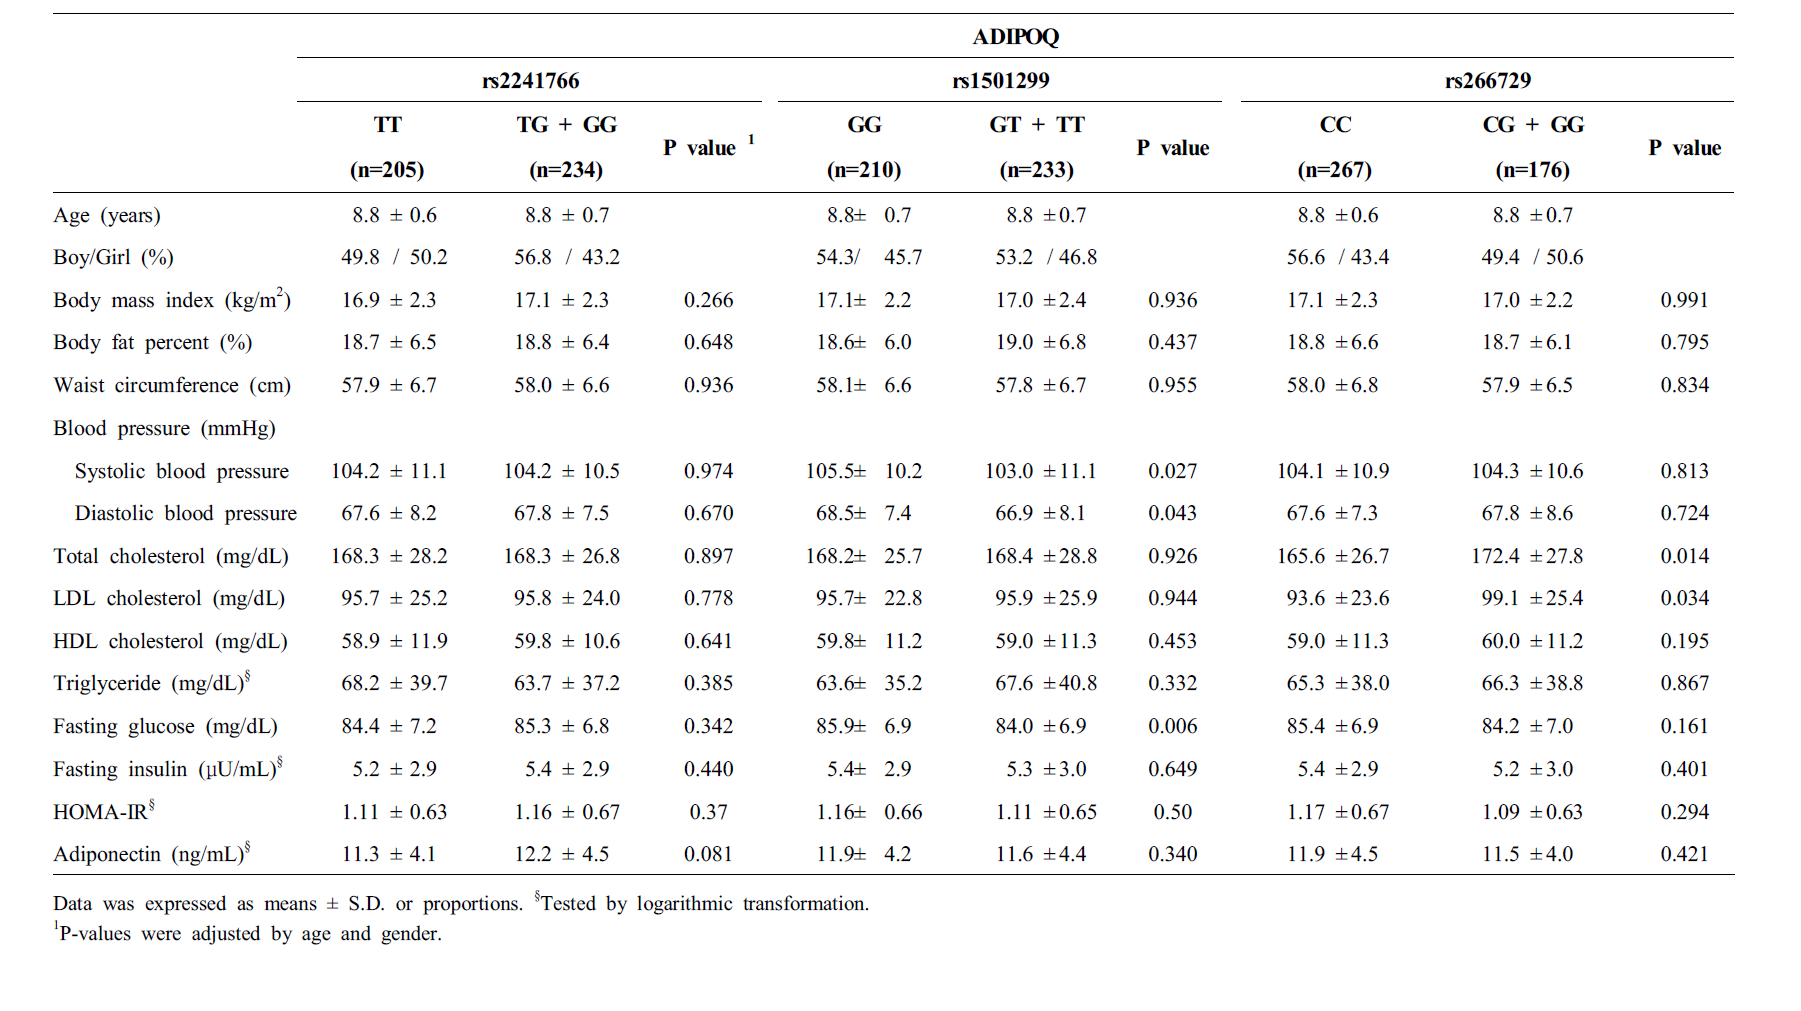 Comparison of anthropometric, metabolic parameters, anddietary intake according to the polymorphism of ADIPOQ